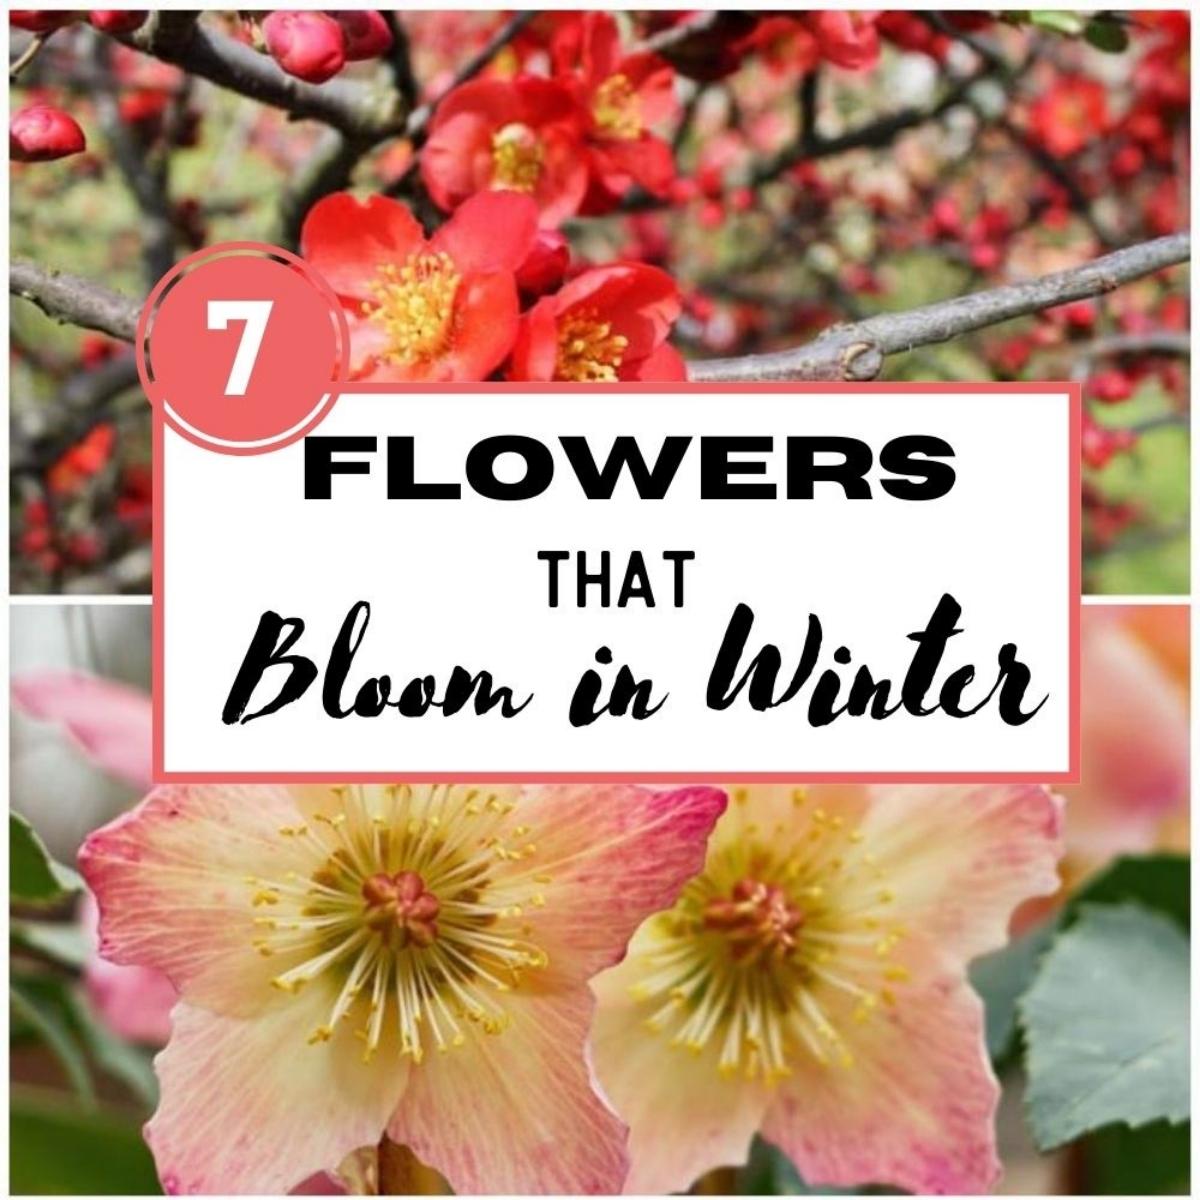 7 flowers that bloom in winter with images of flowering quince and hellebores